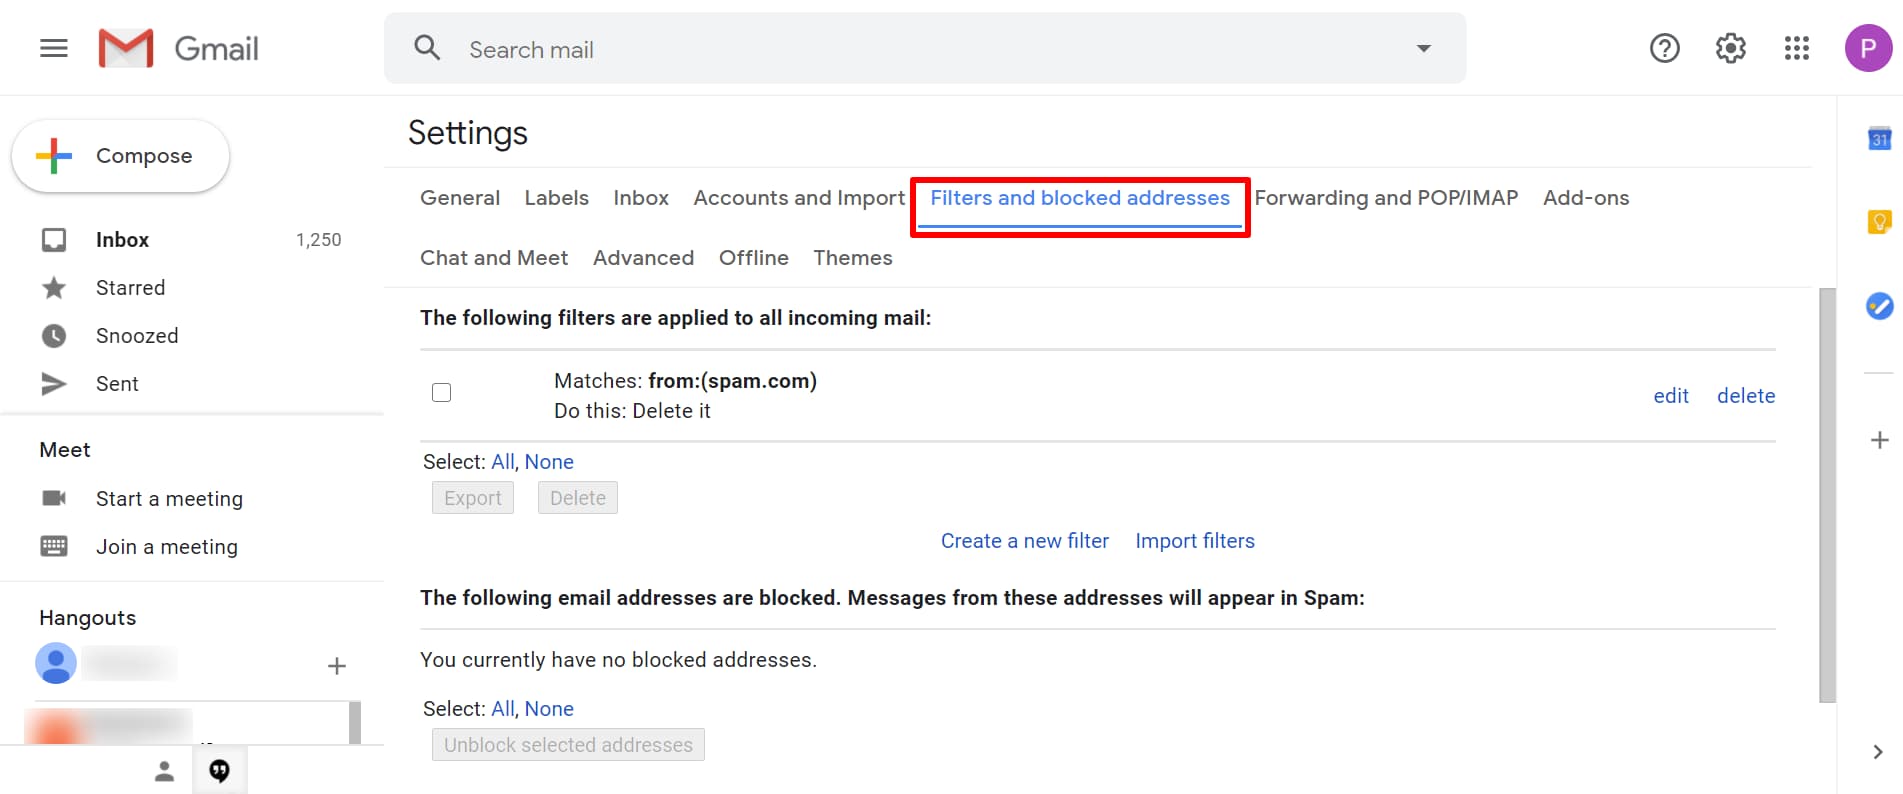 how to block email on gmail: select filters and blocked addresses 